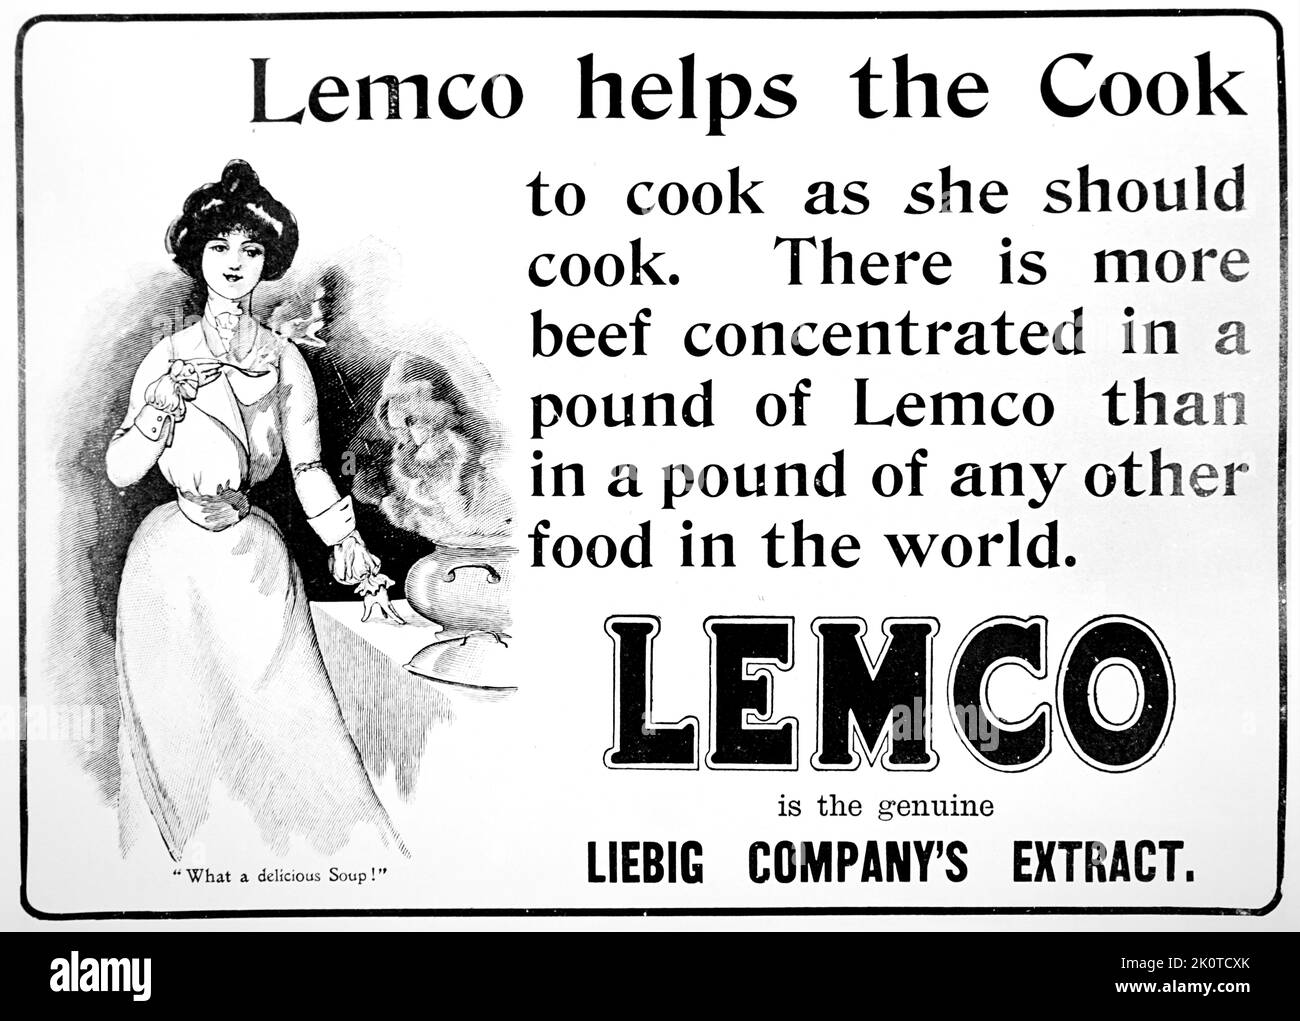 Leibig advert for 'Lemco' food extract for cooking. 1880 Stock Photo